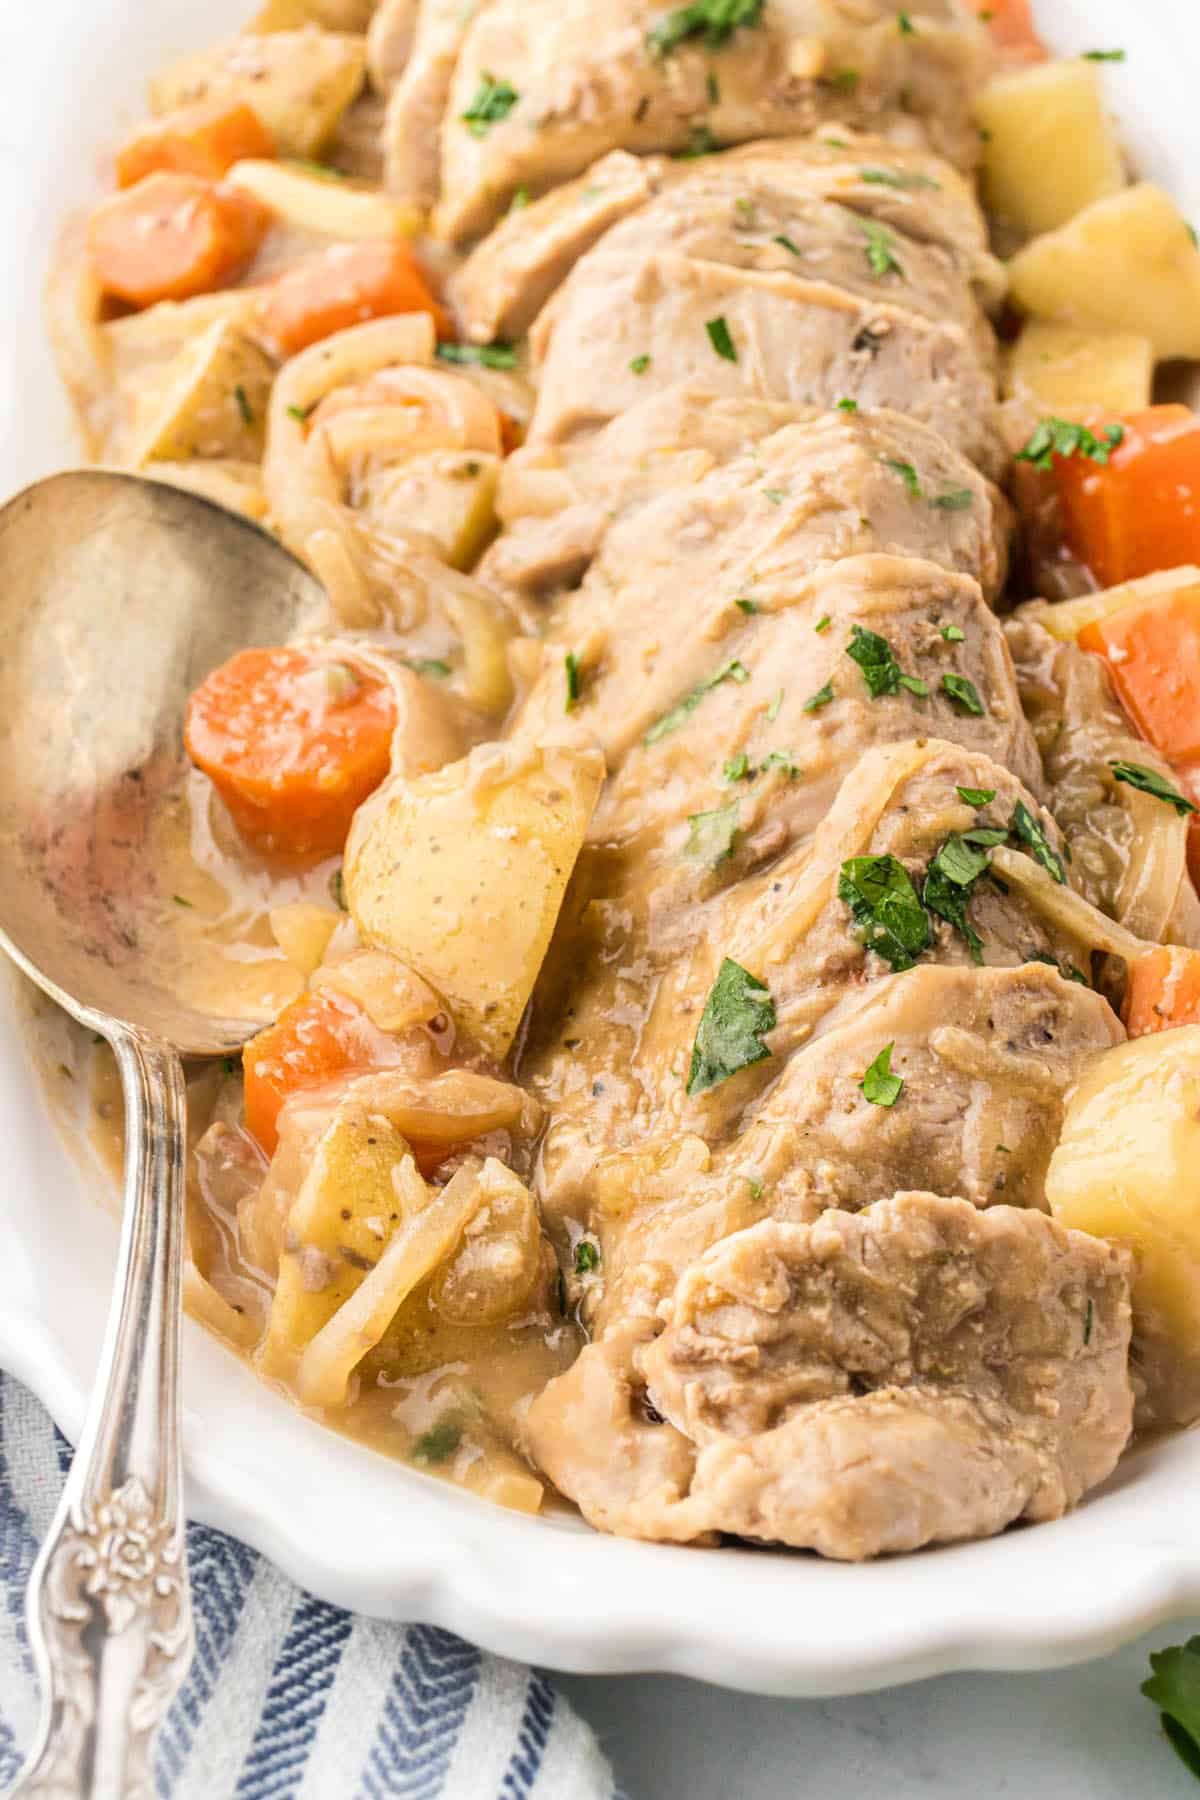 A white platter with sliced pork tenderloin, potatoes and carrots covered in gravy. A serving spoon is on the side.